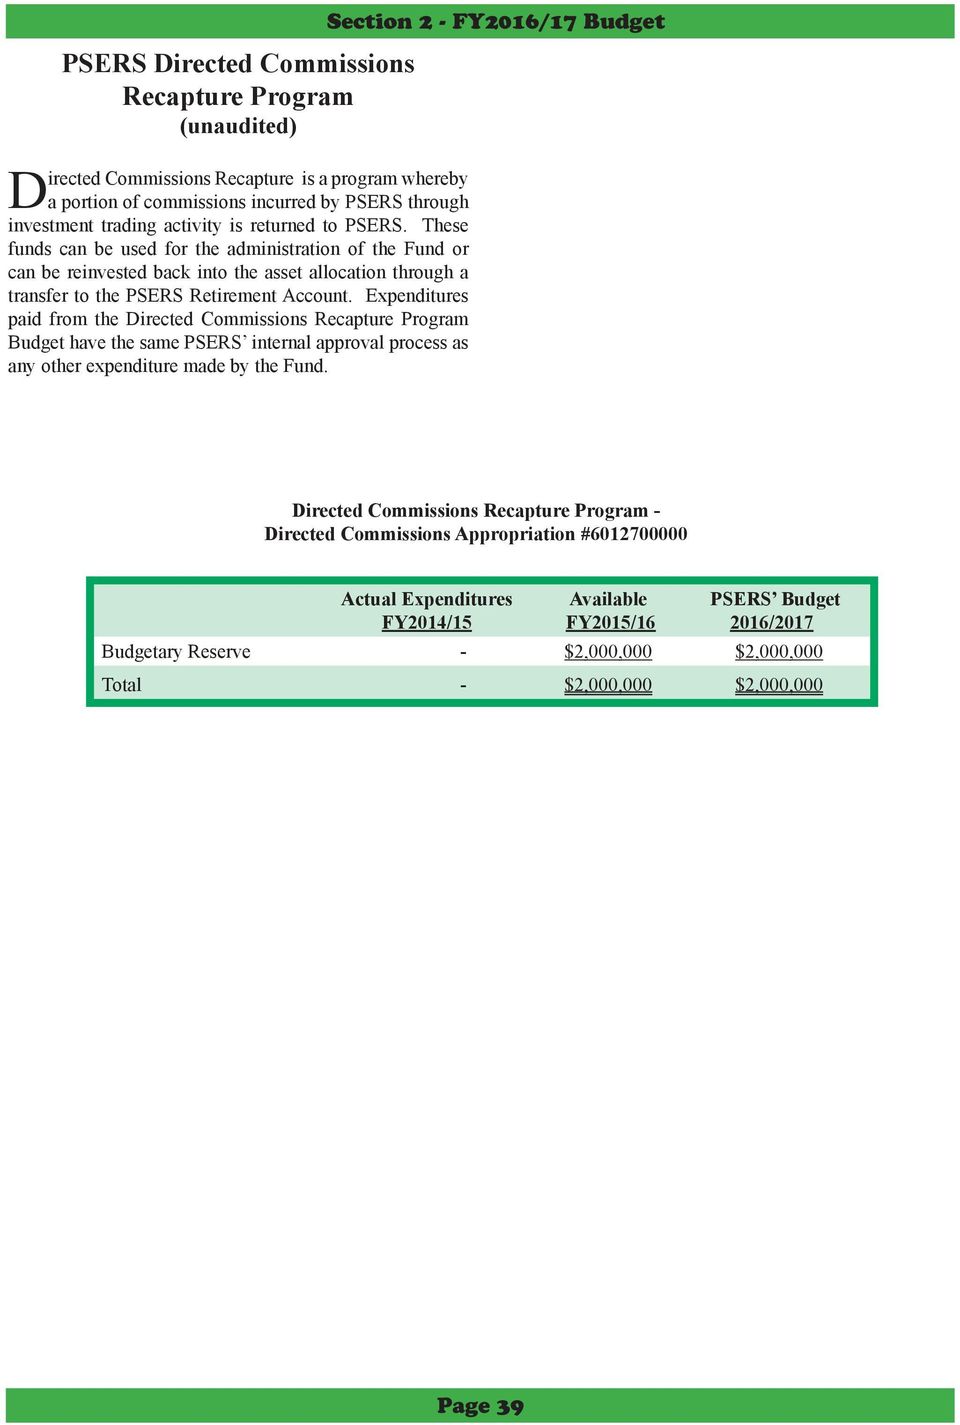 Expenditures paid from the Directed Commissions Recapture Program have the same PSERS internal approval process as any other expenditure made by the Fund.